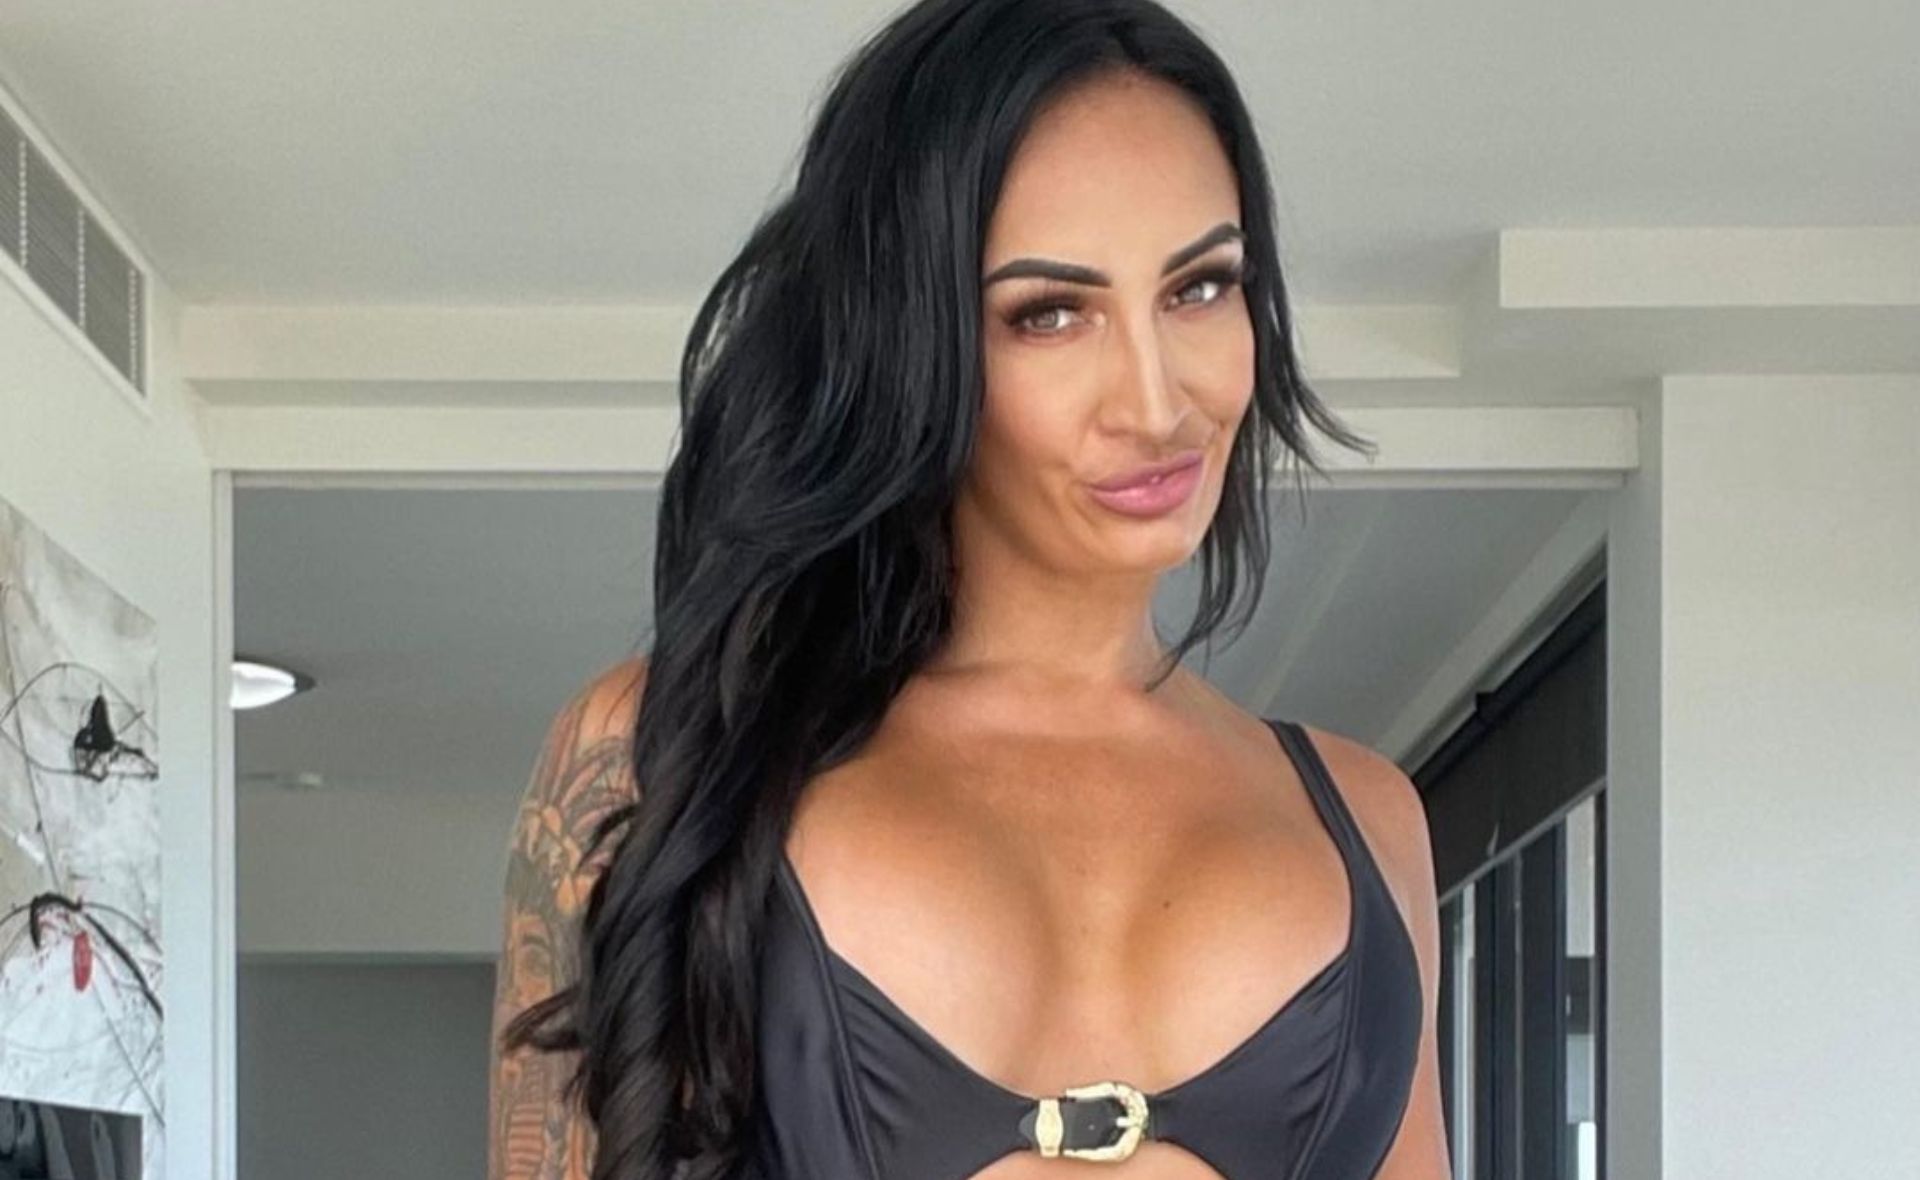 Former MAFS star Hayley Vernon reveals the shocking amount of money she makes as a high-class escort